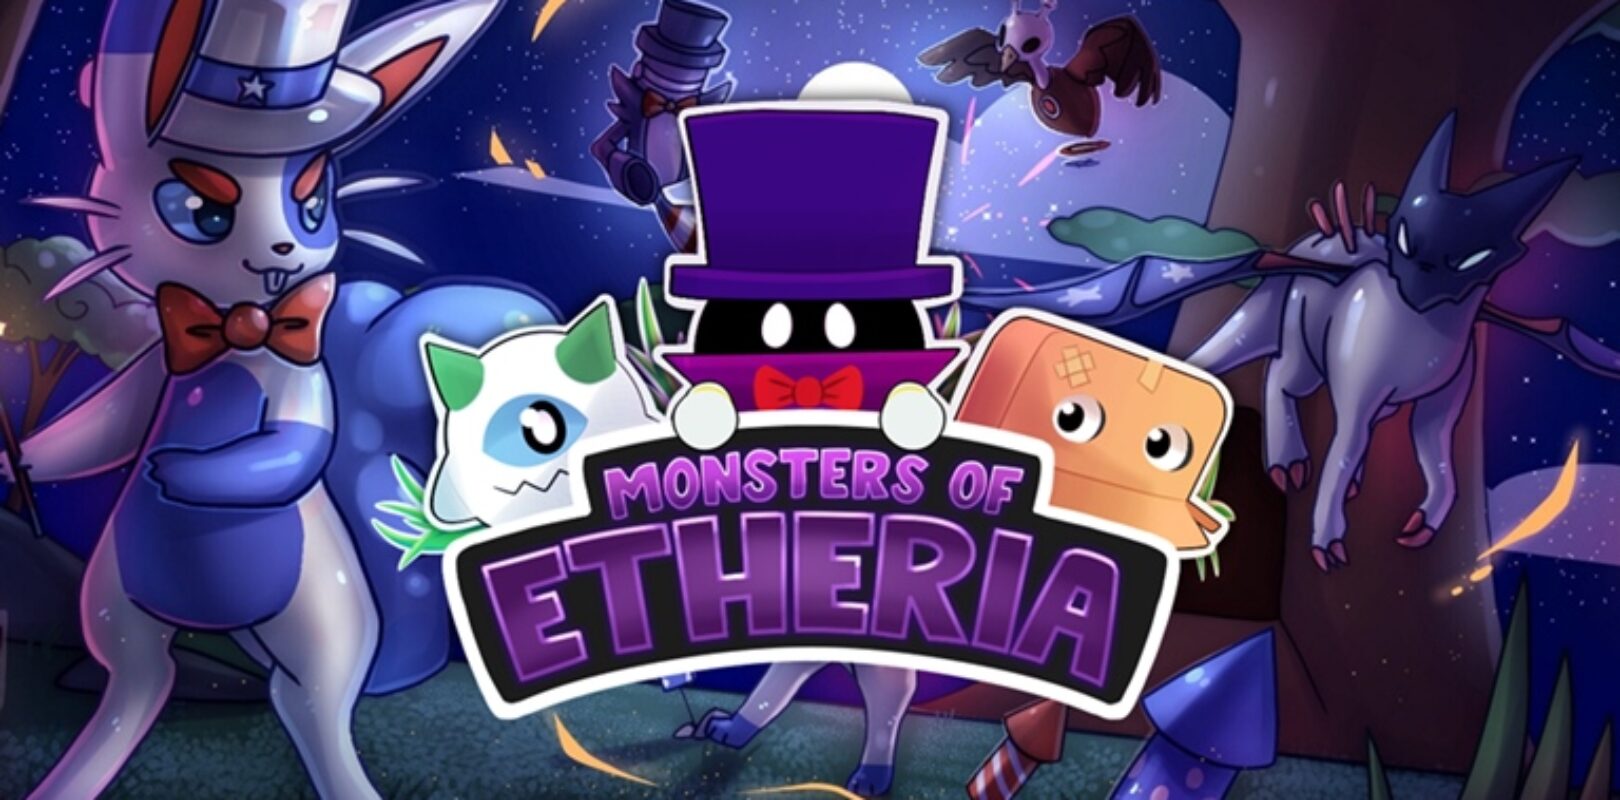 Roblox Monsters of Etheria Codes 2020